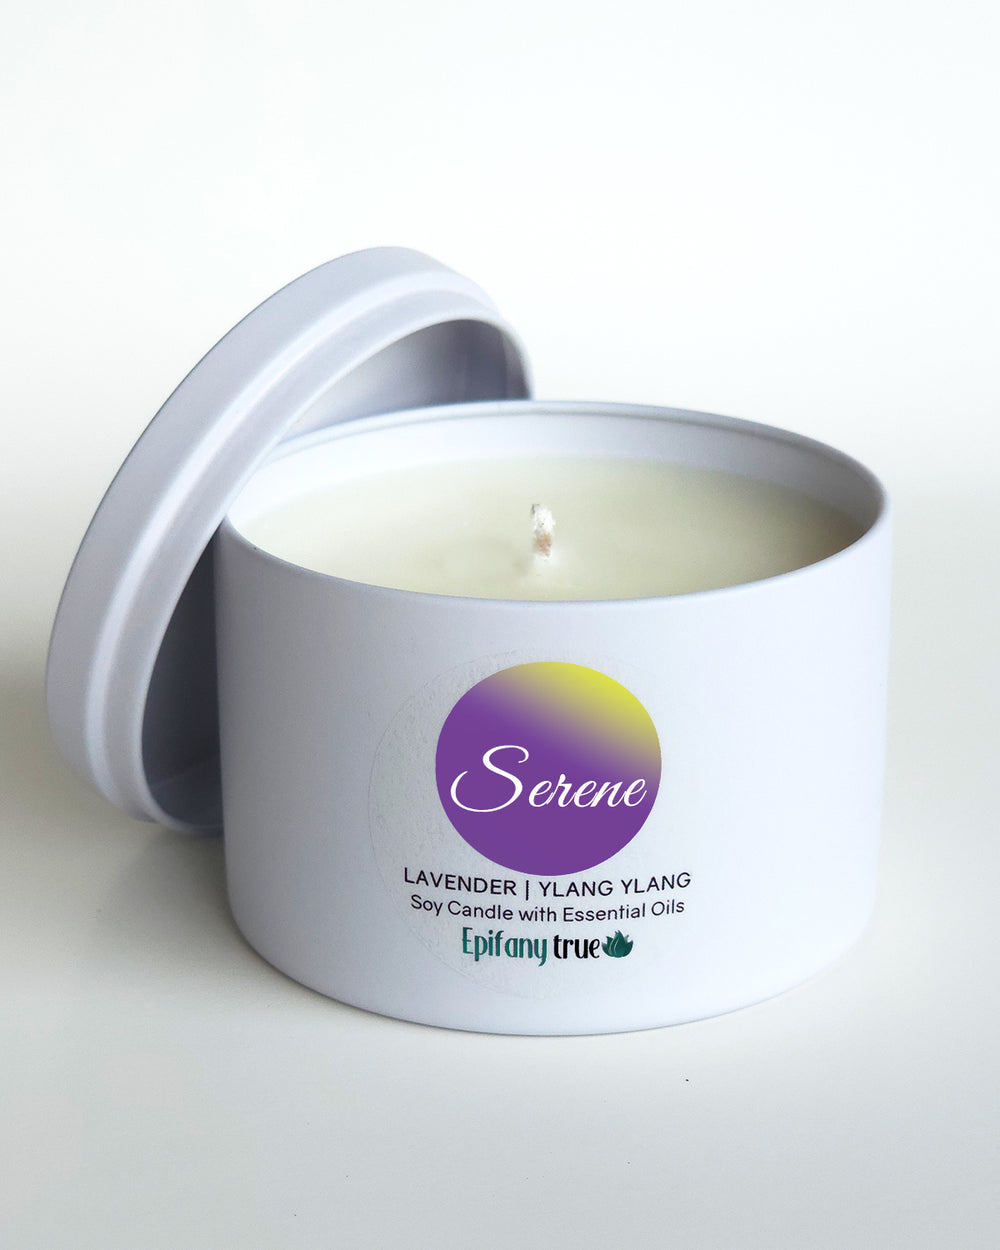 SERENE Lavender and Ylang Ylang Wellness Candle with Organic Soy Wax and Essential Oils 8oz